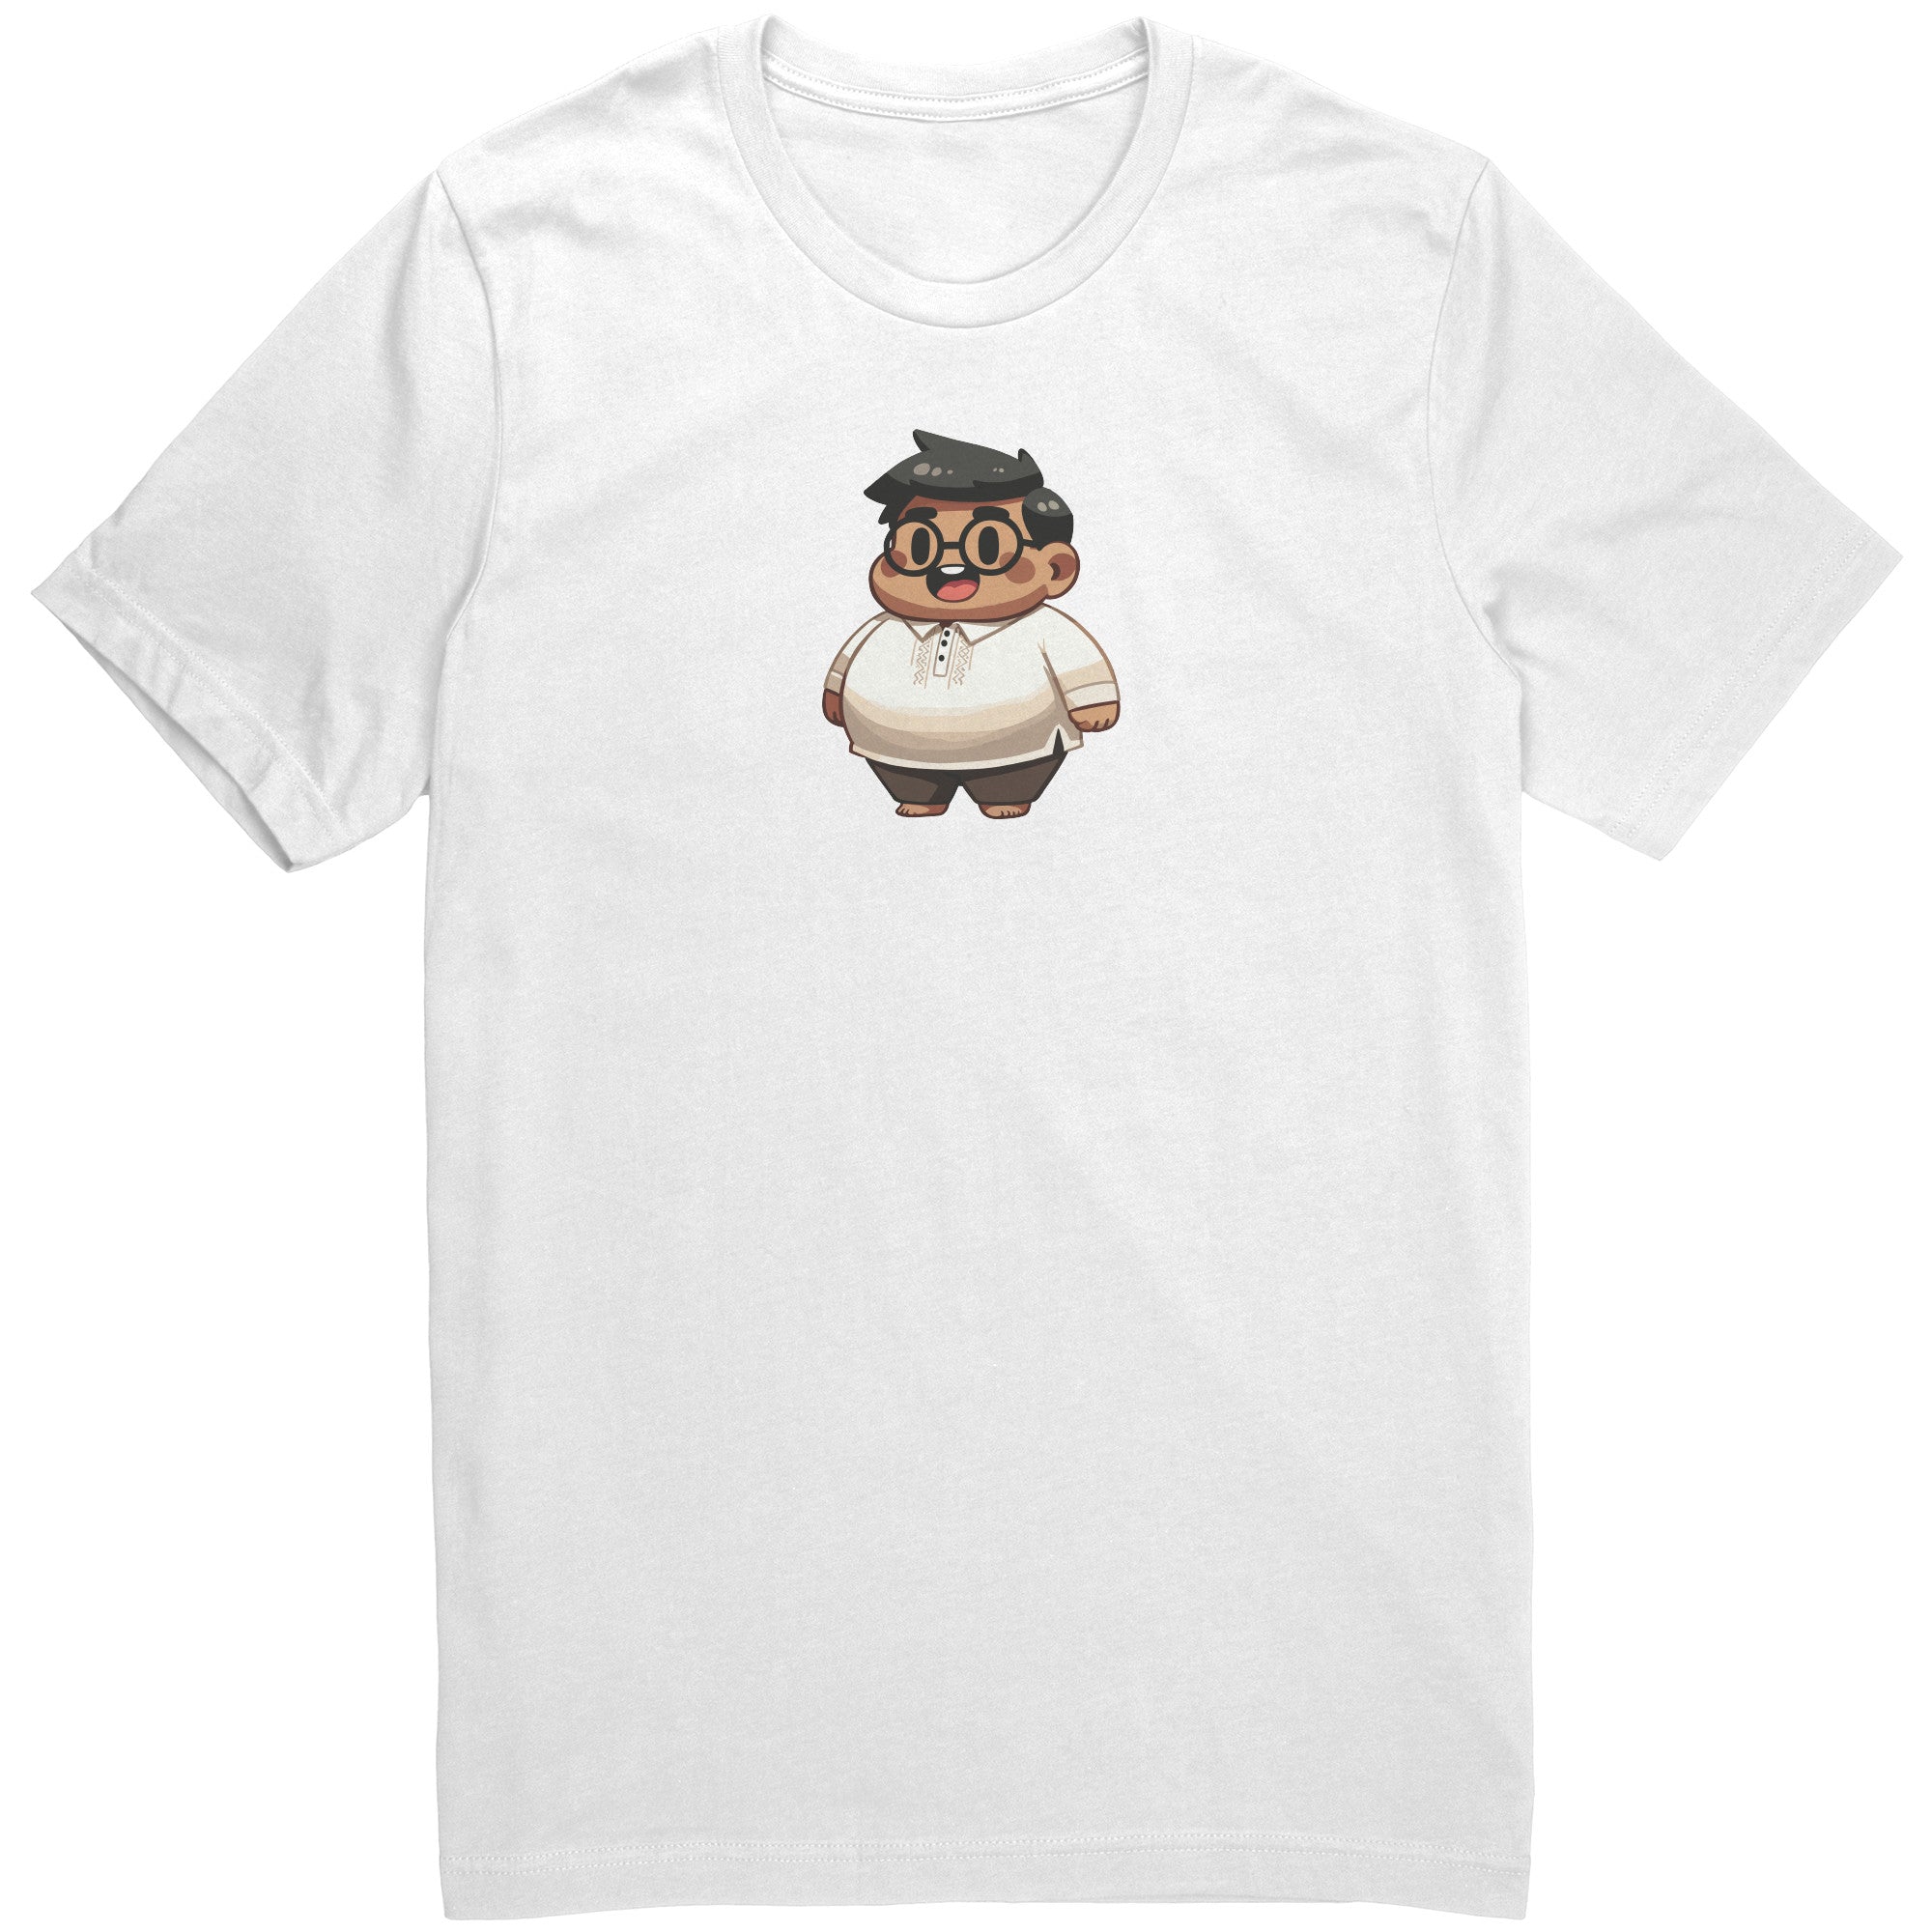 "Cute Cartoon Filipino Pride T-shirt - Vibrant Pinoy Pride Tee - Perfect Gift for Filipinos - Colorful Philippines Heritage Tee" - V